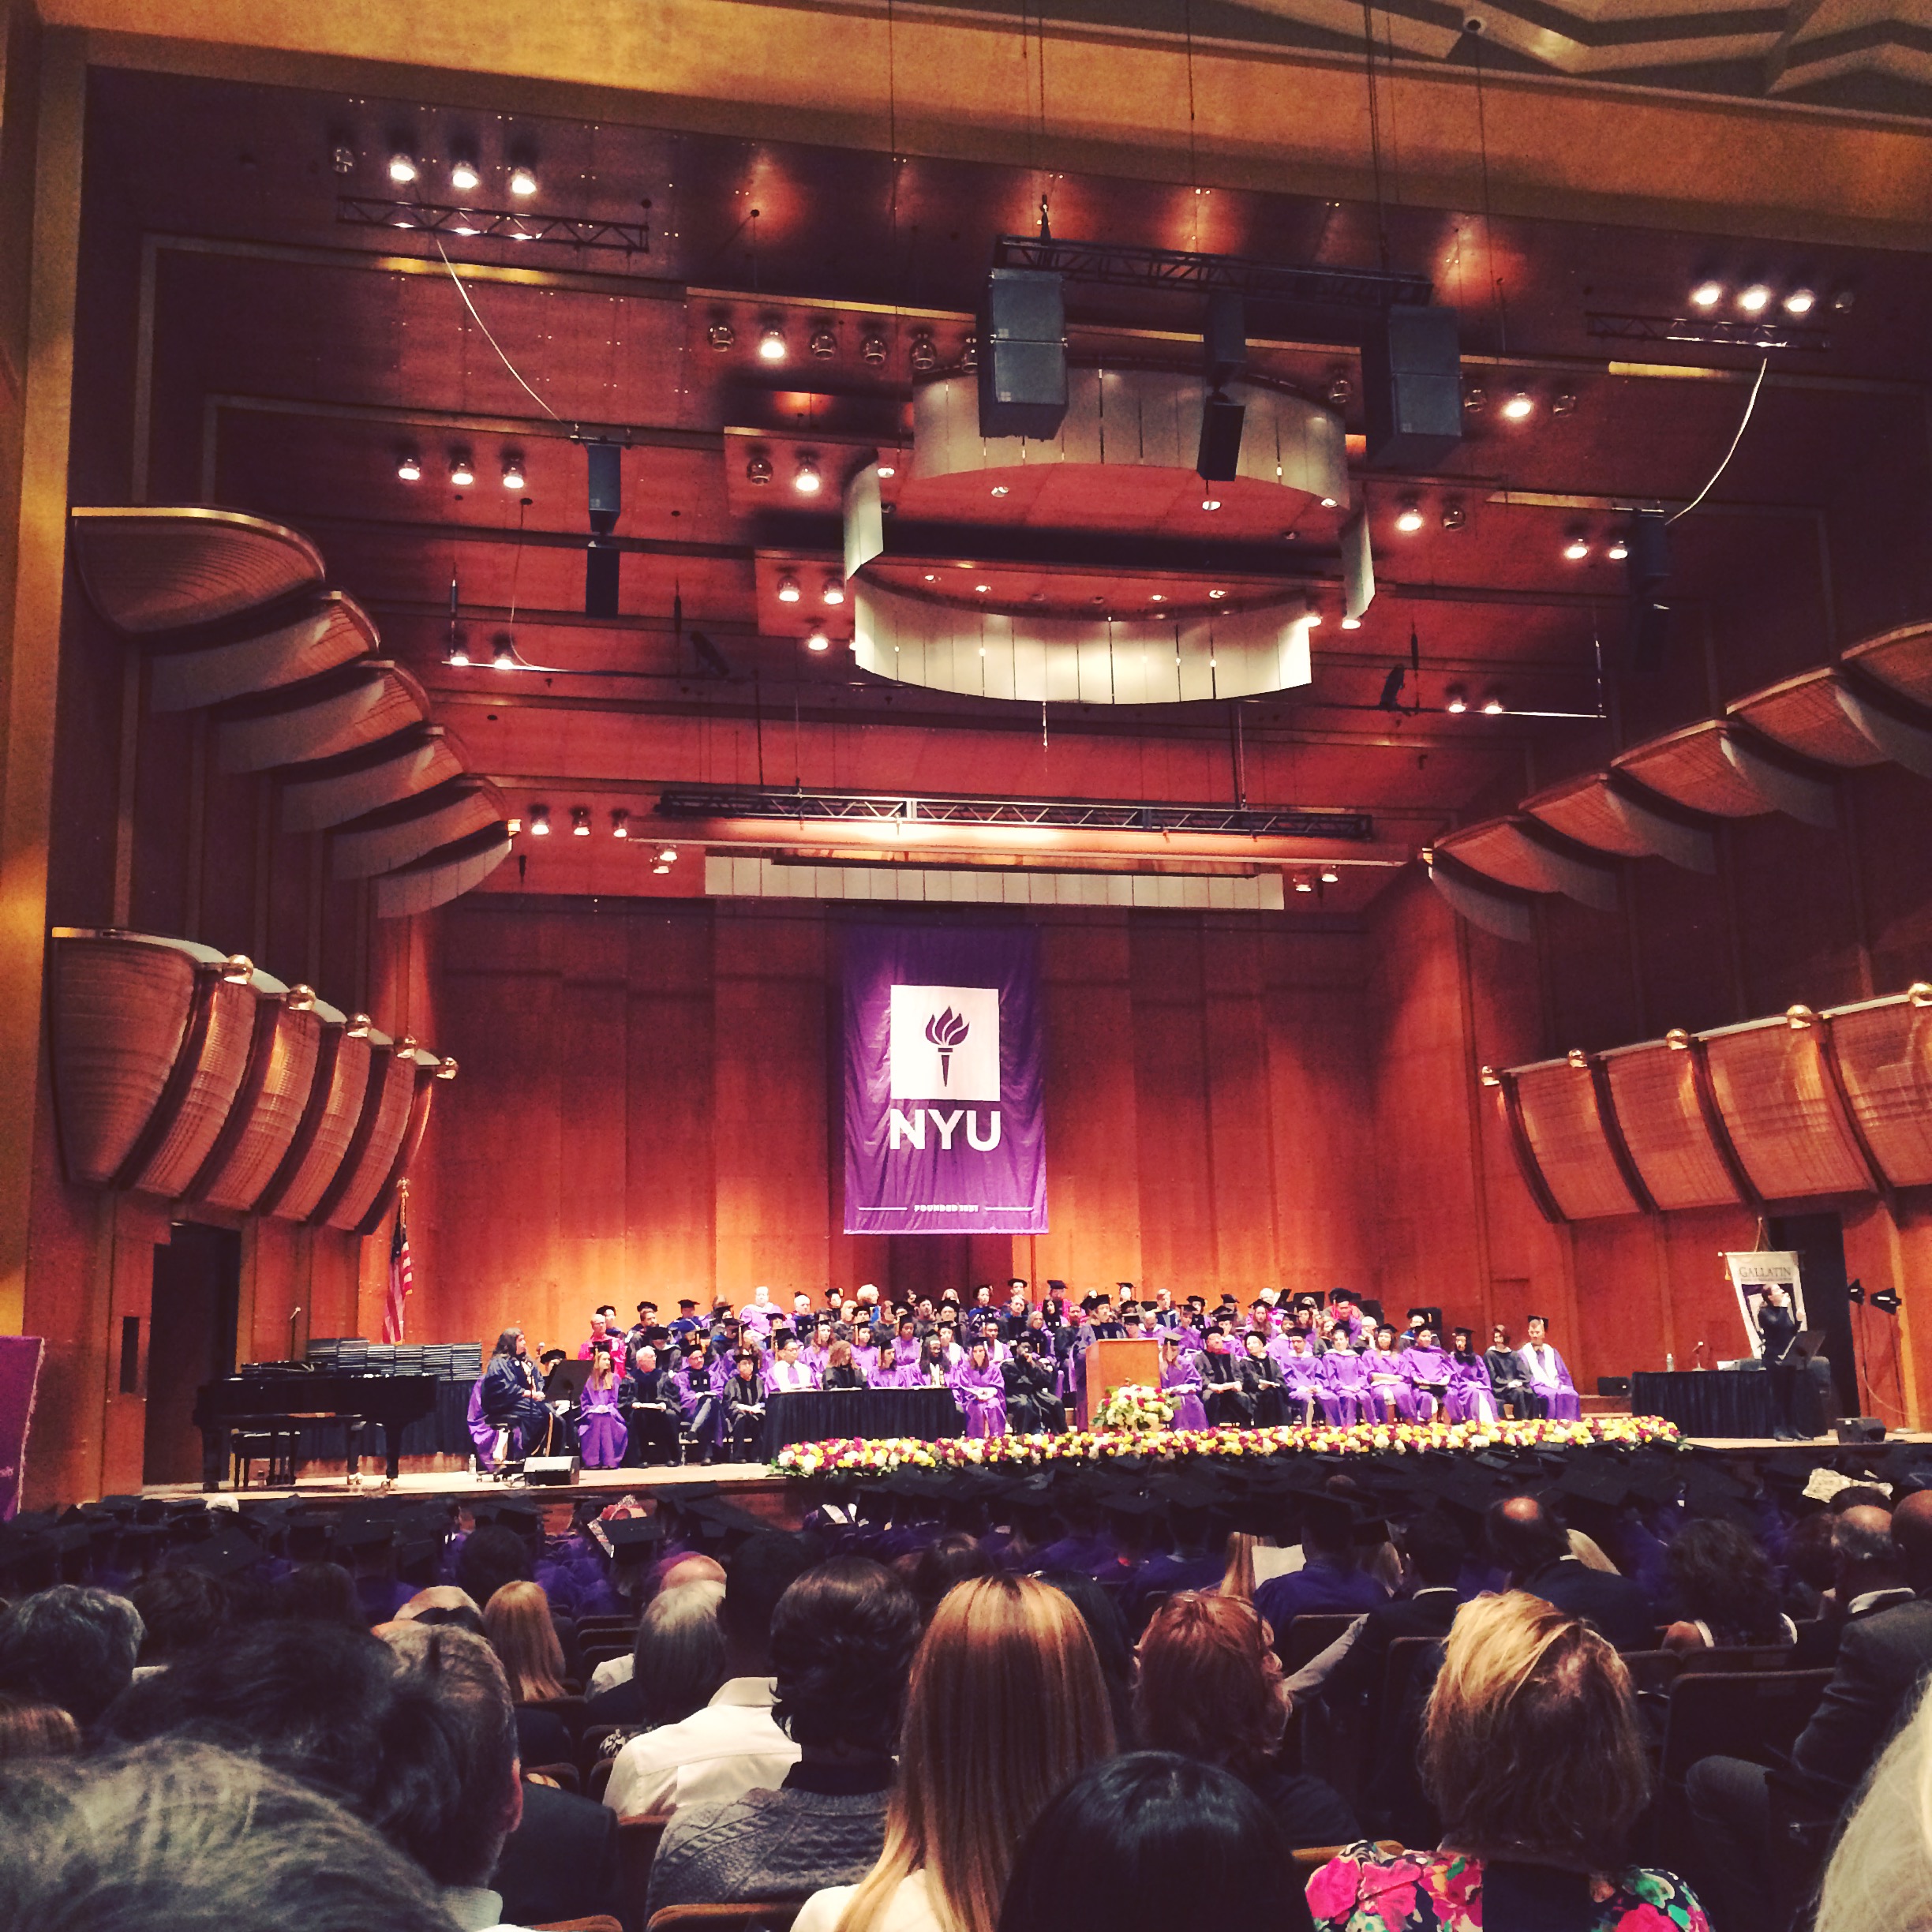 I went to my sister's college graduation!